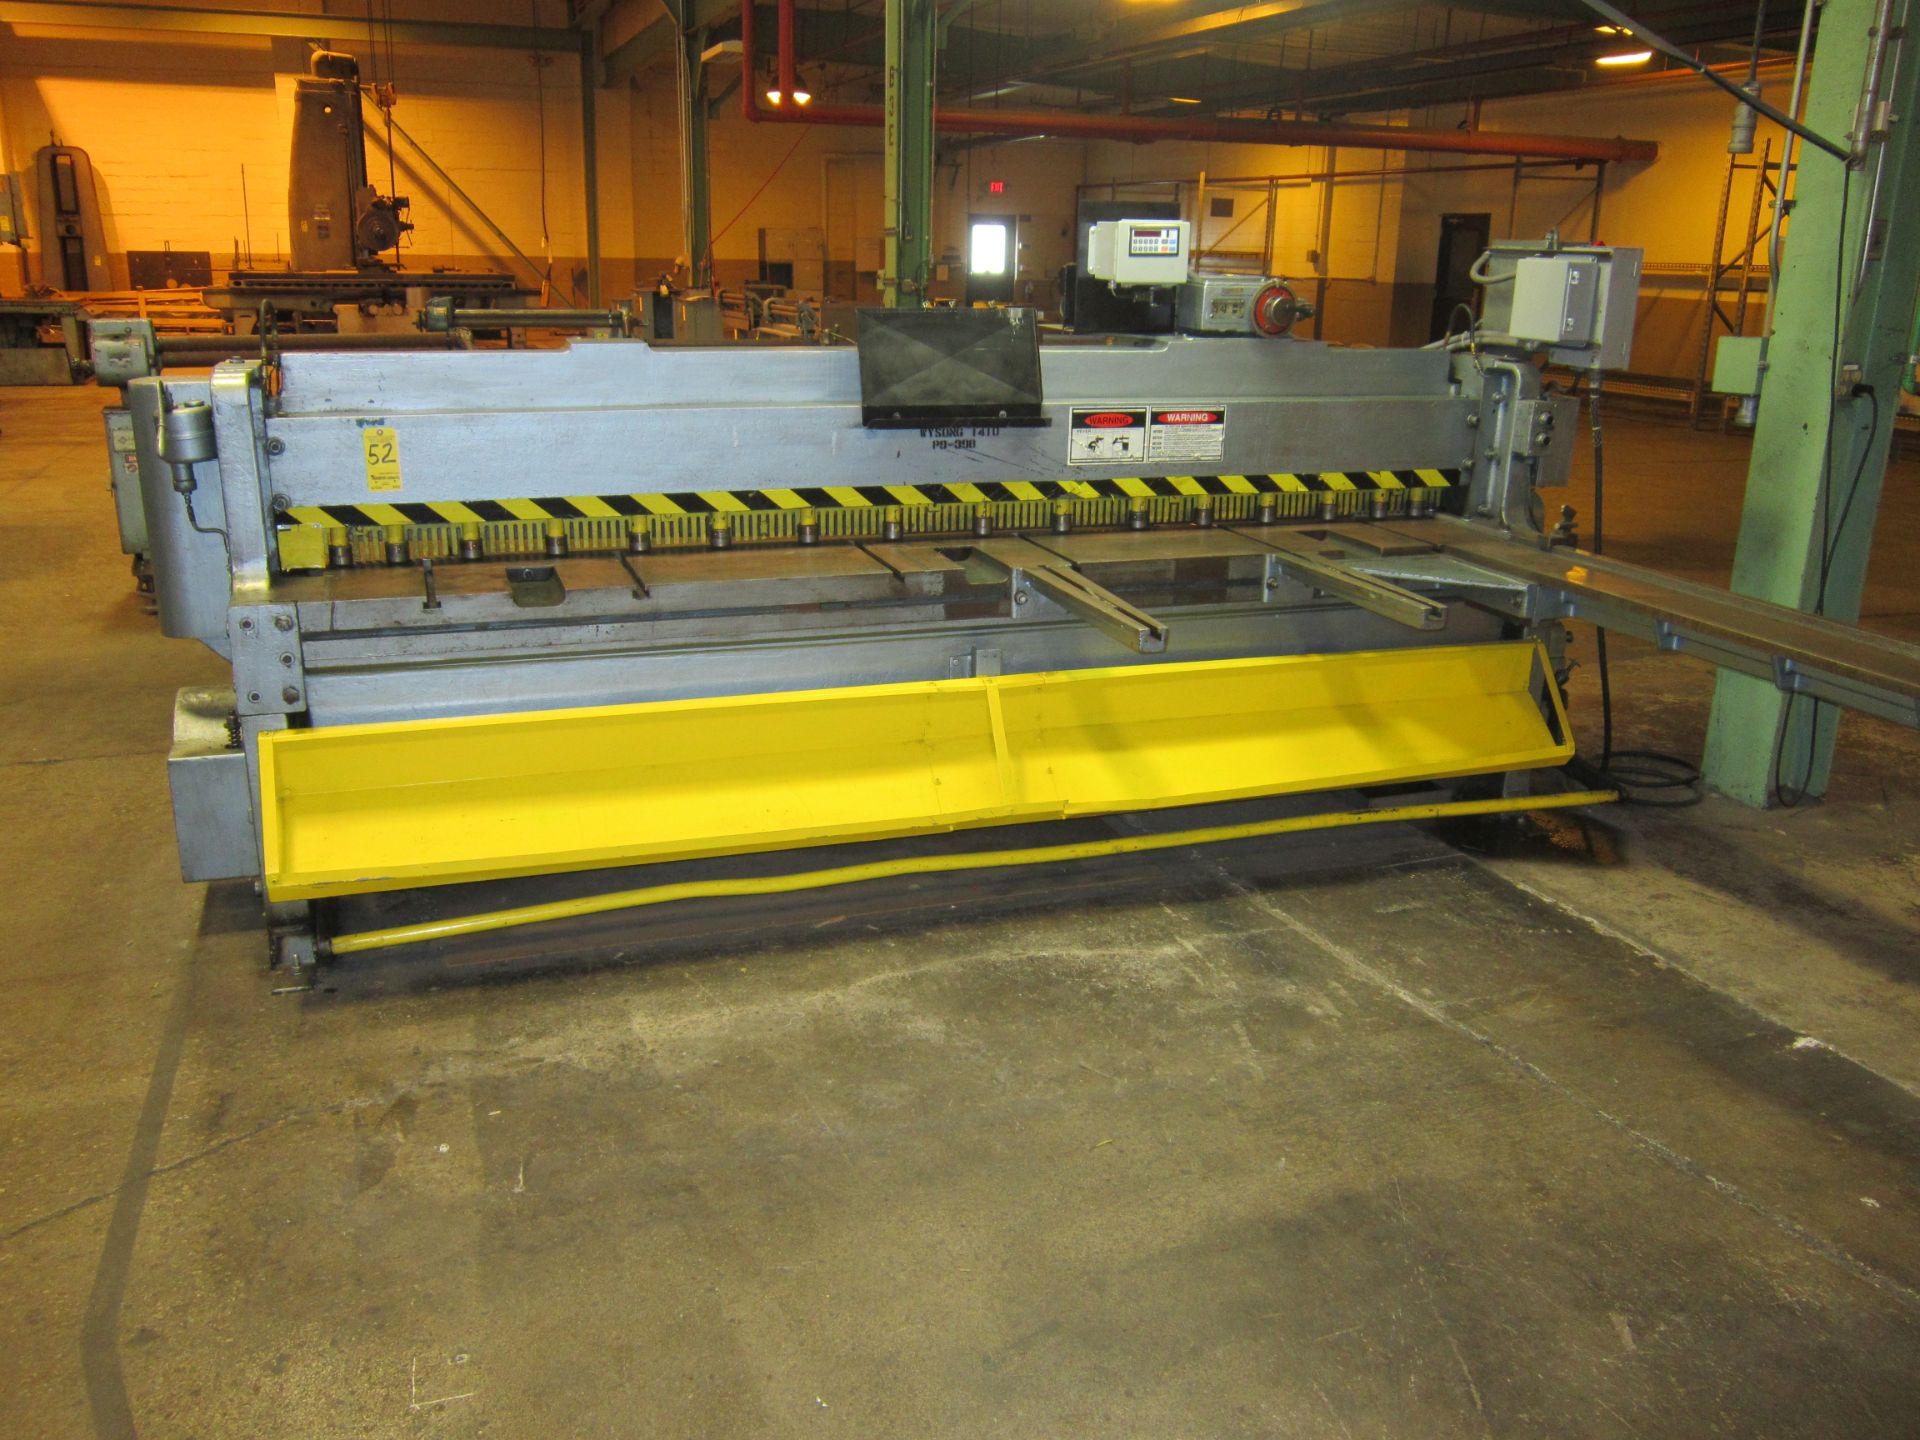 Wysong Model 1410 Power Squaring Shear, s/n P9-398, 10 Ft. X 14 Gauge Capacity, Front Operated Power - Image 4 of 5